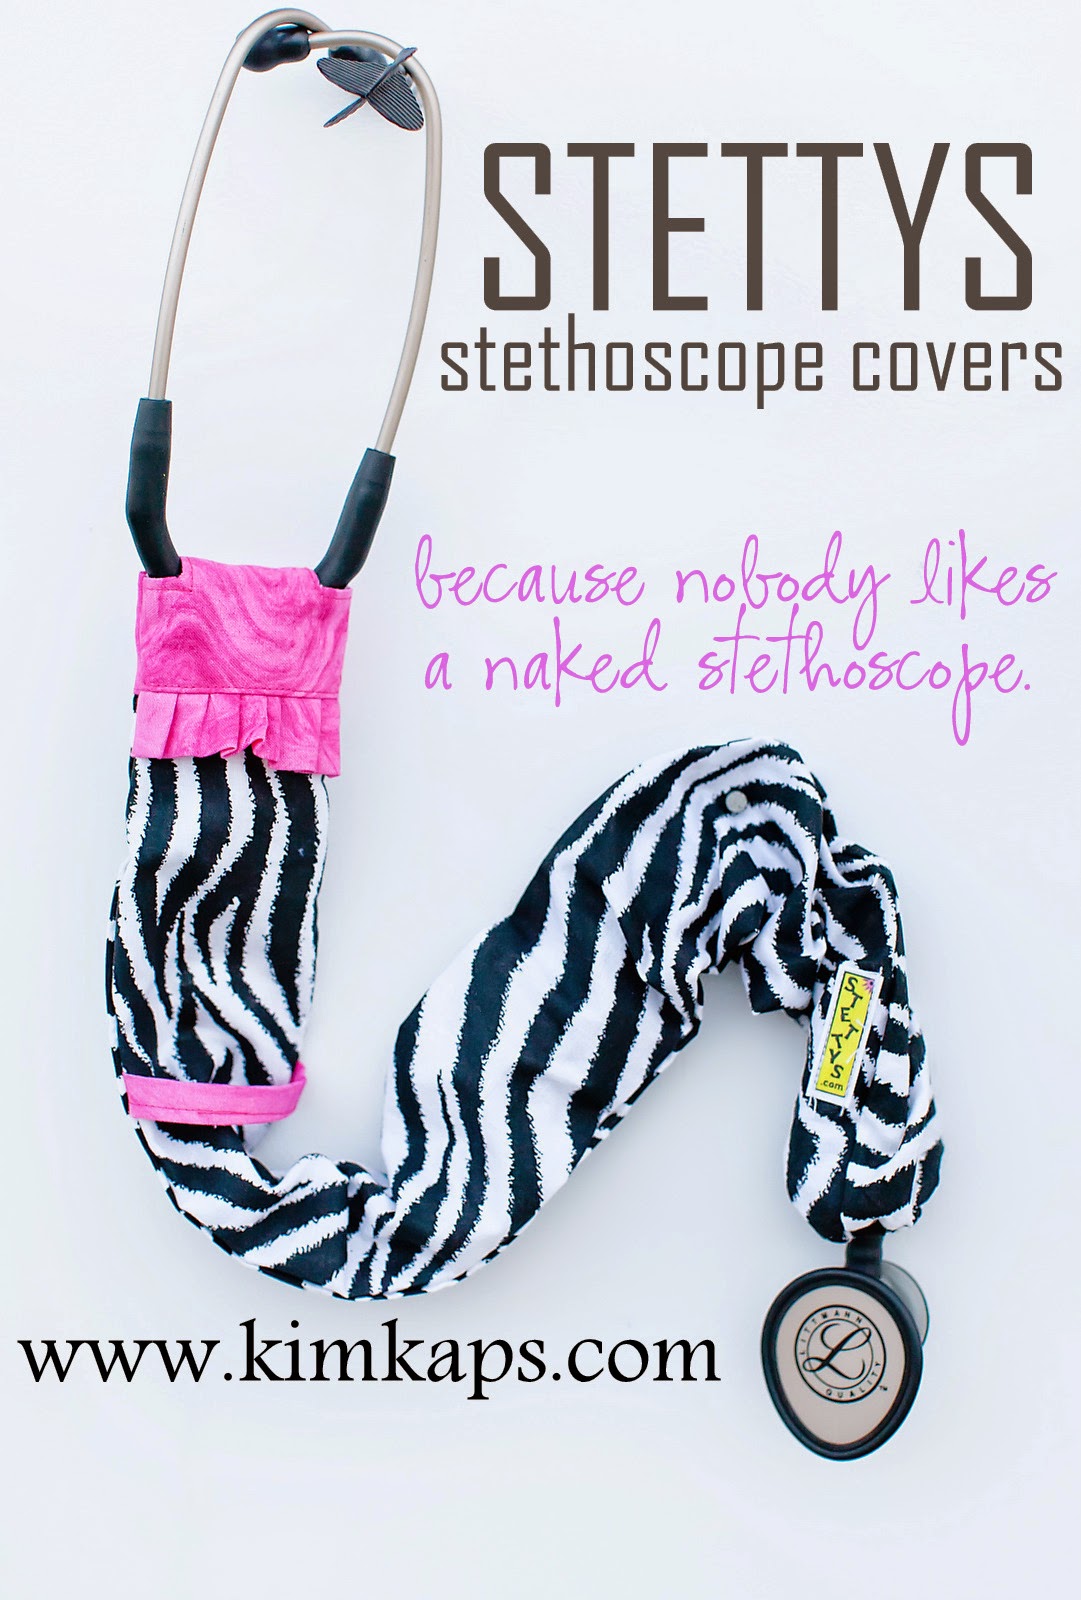 Stettys Stethoscope Covers